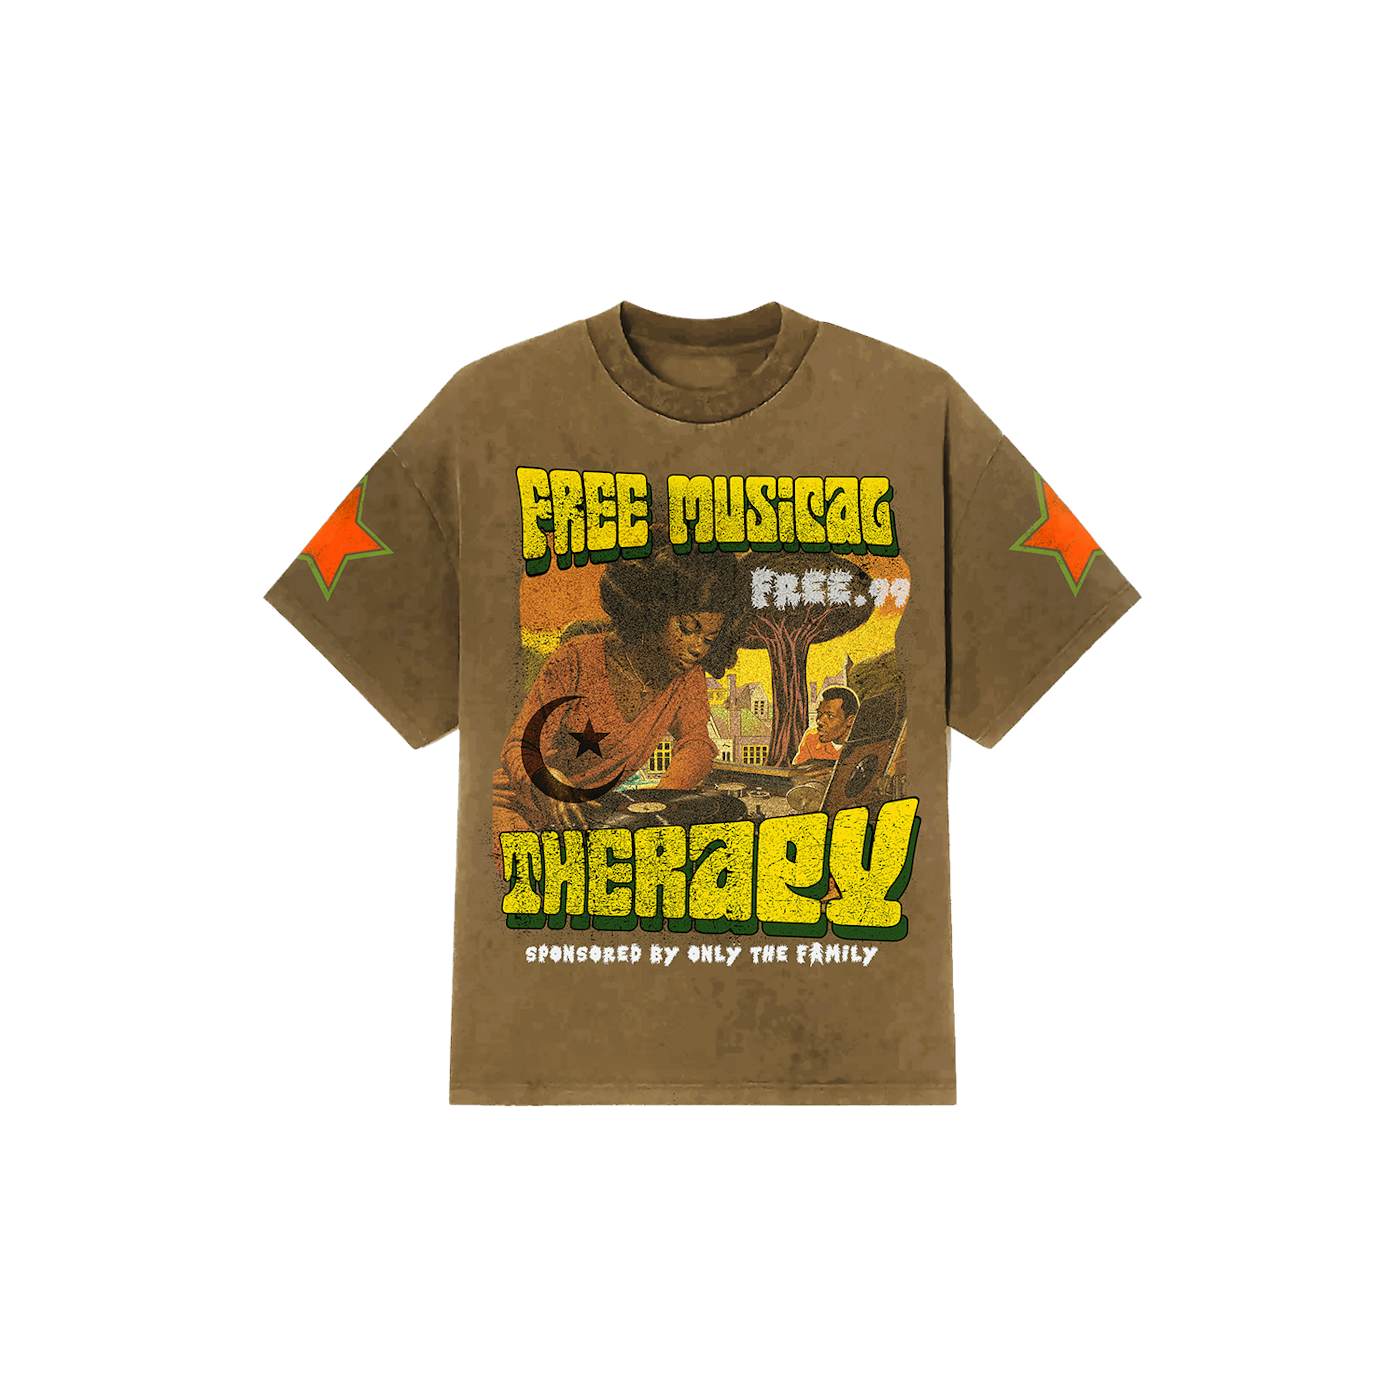 Lil Durk Free Musical Therapy Tee